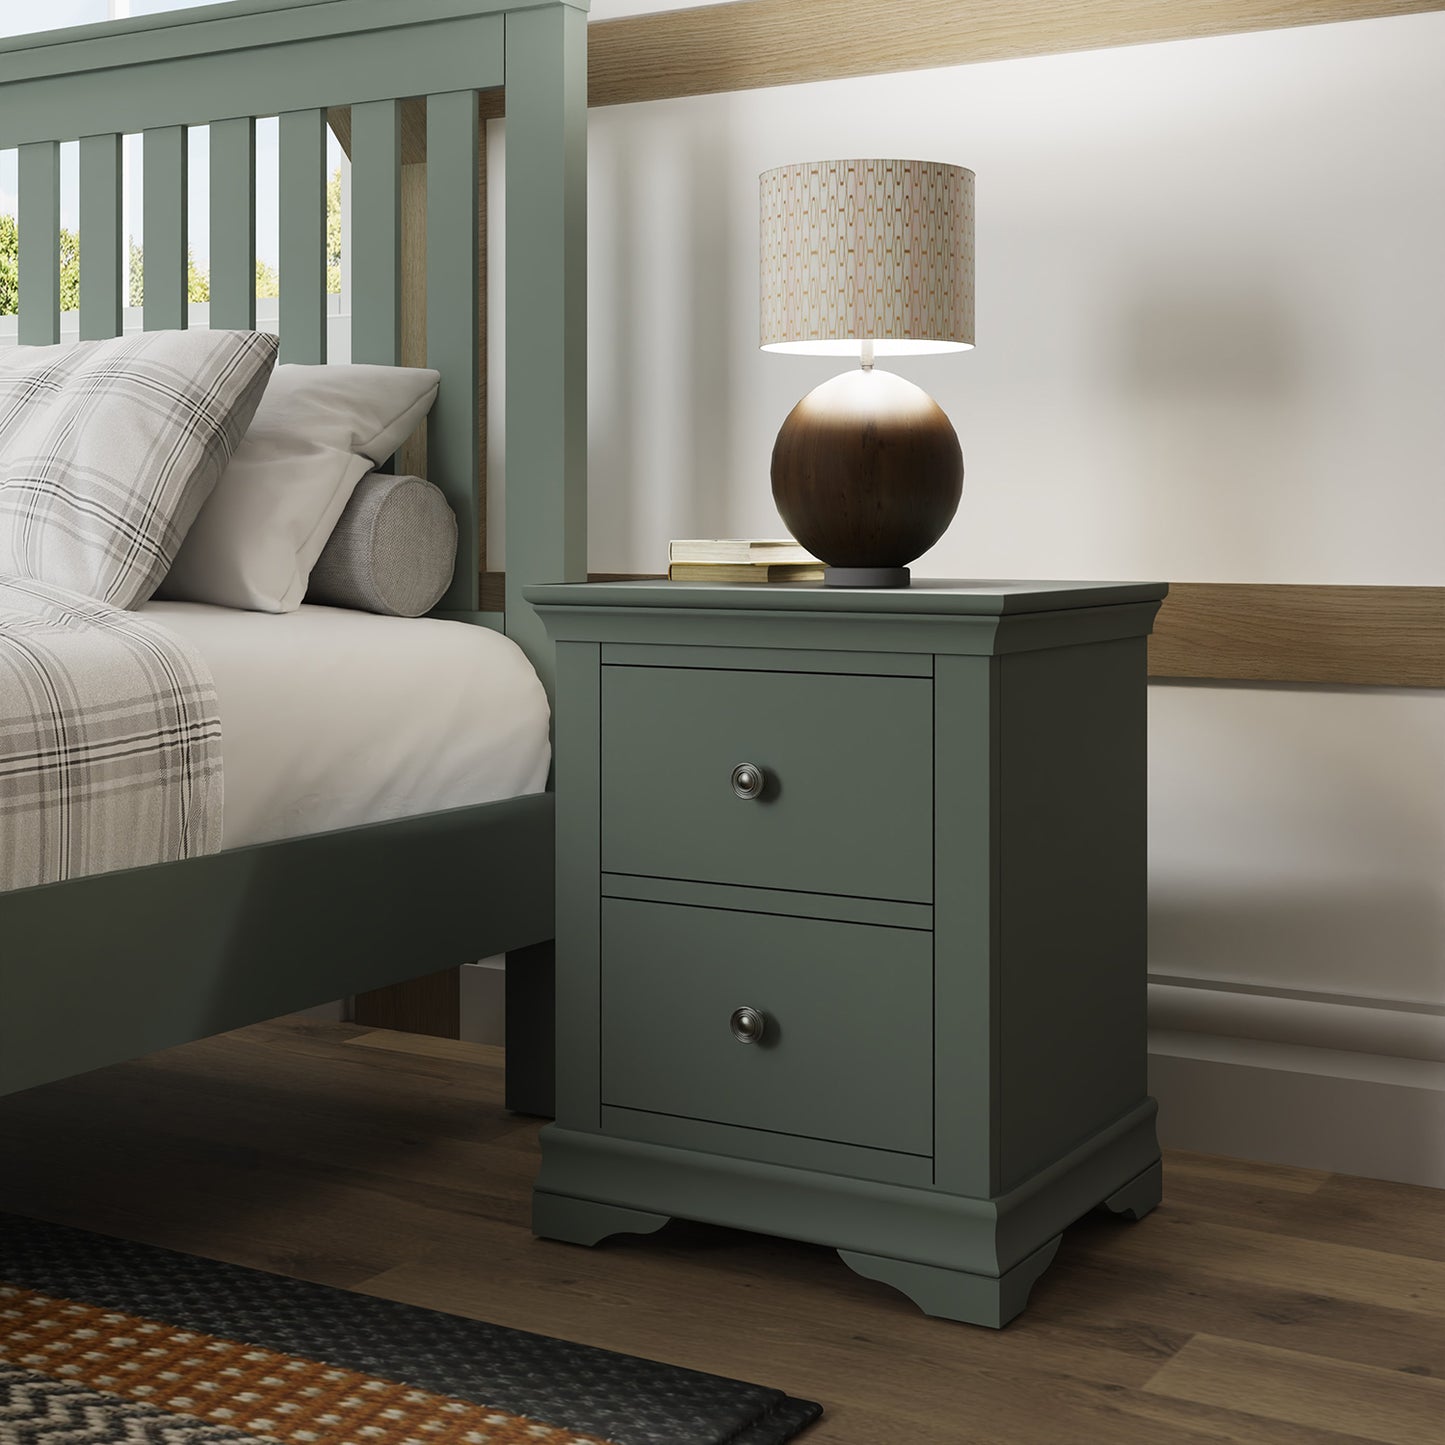 Painted Bedroom Furniture Norwich